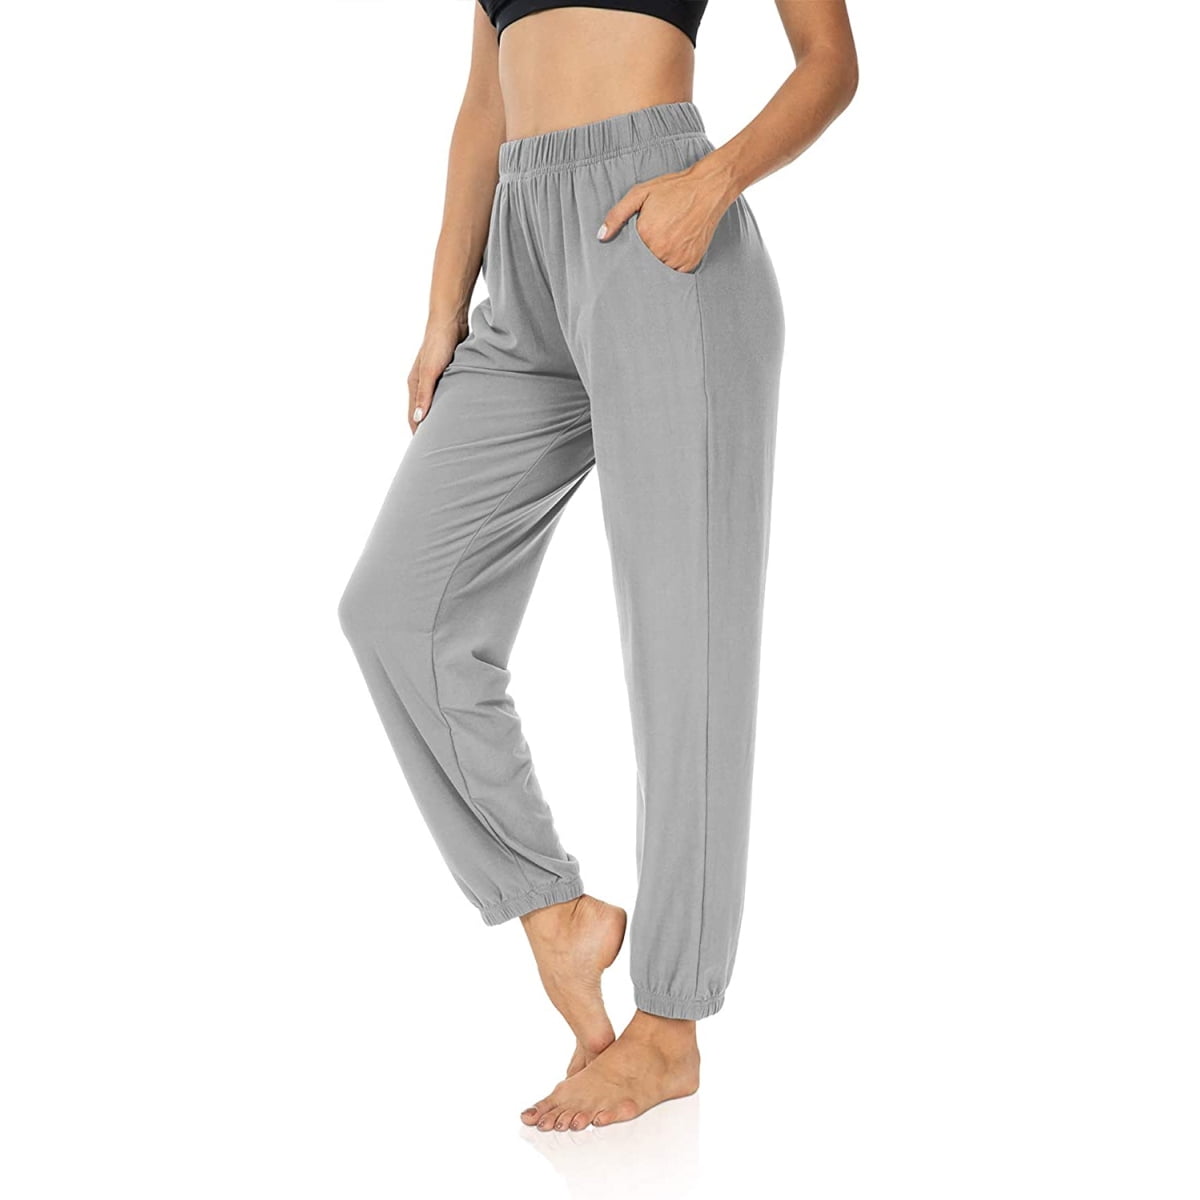 Ankle-banded Pants Sweatpants Joggers with Pockets Workout Pants for ...